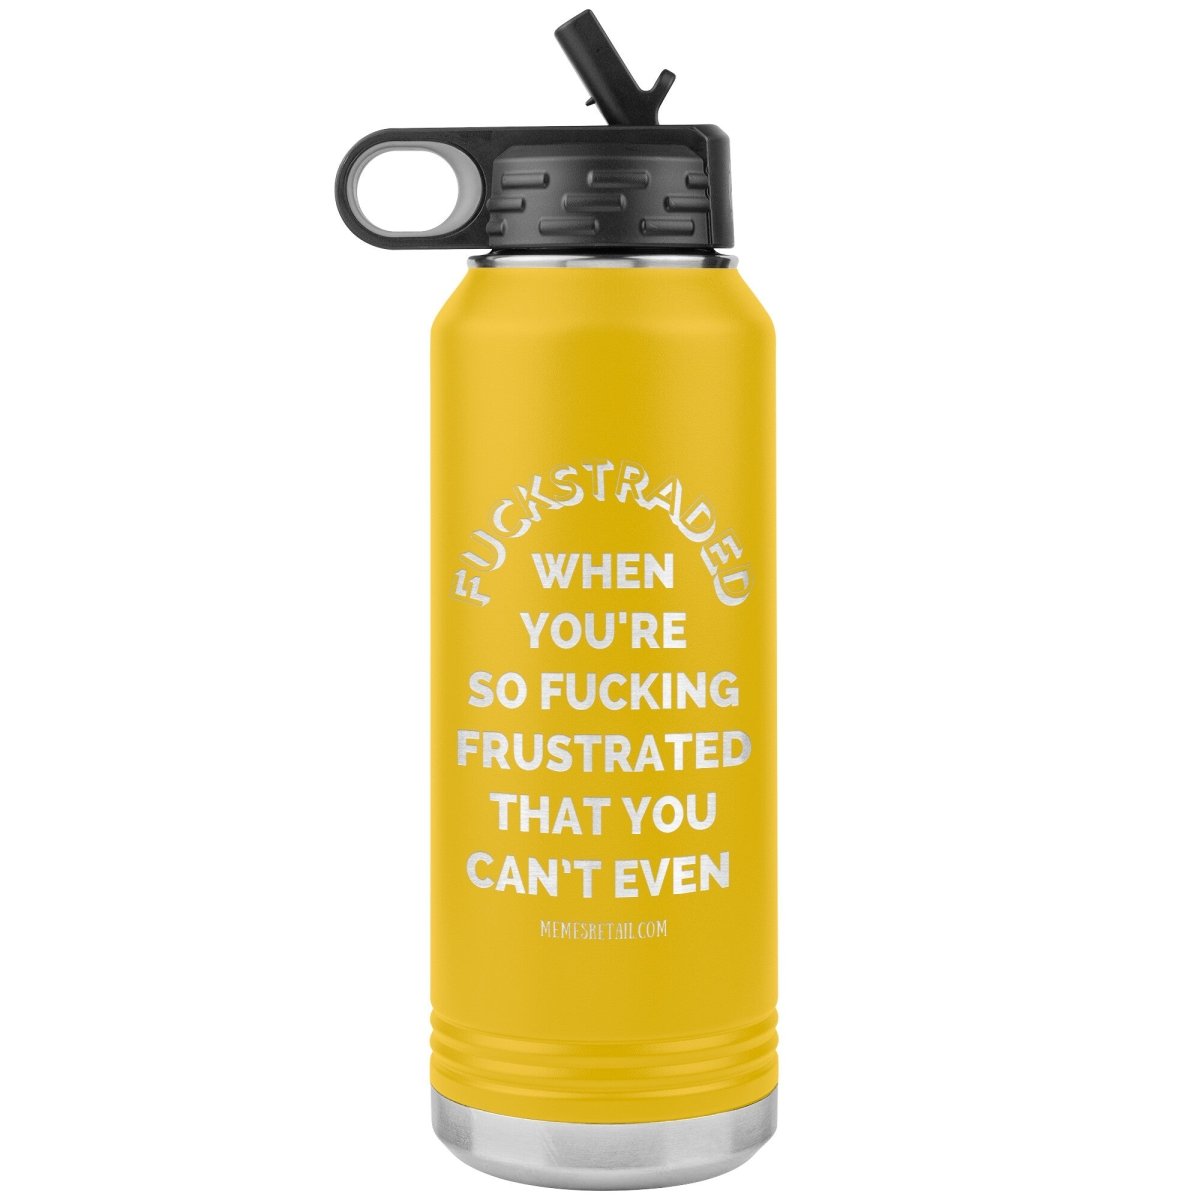 Fuckstraded, When You're So Fucking Frustrated That You Can’t Even - 32oz Water Tumblers, Yellow - MemesRetail.com